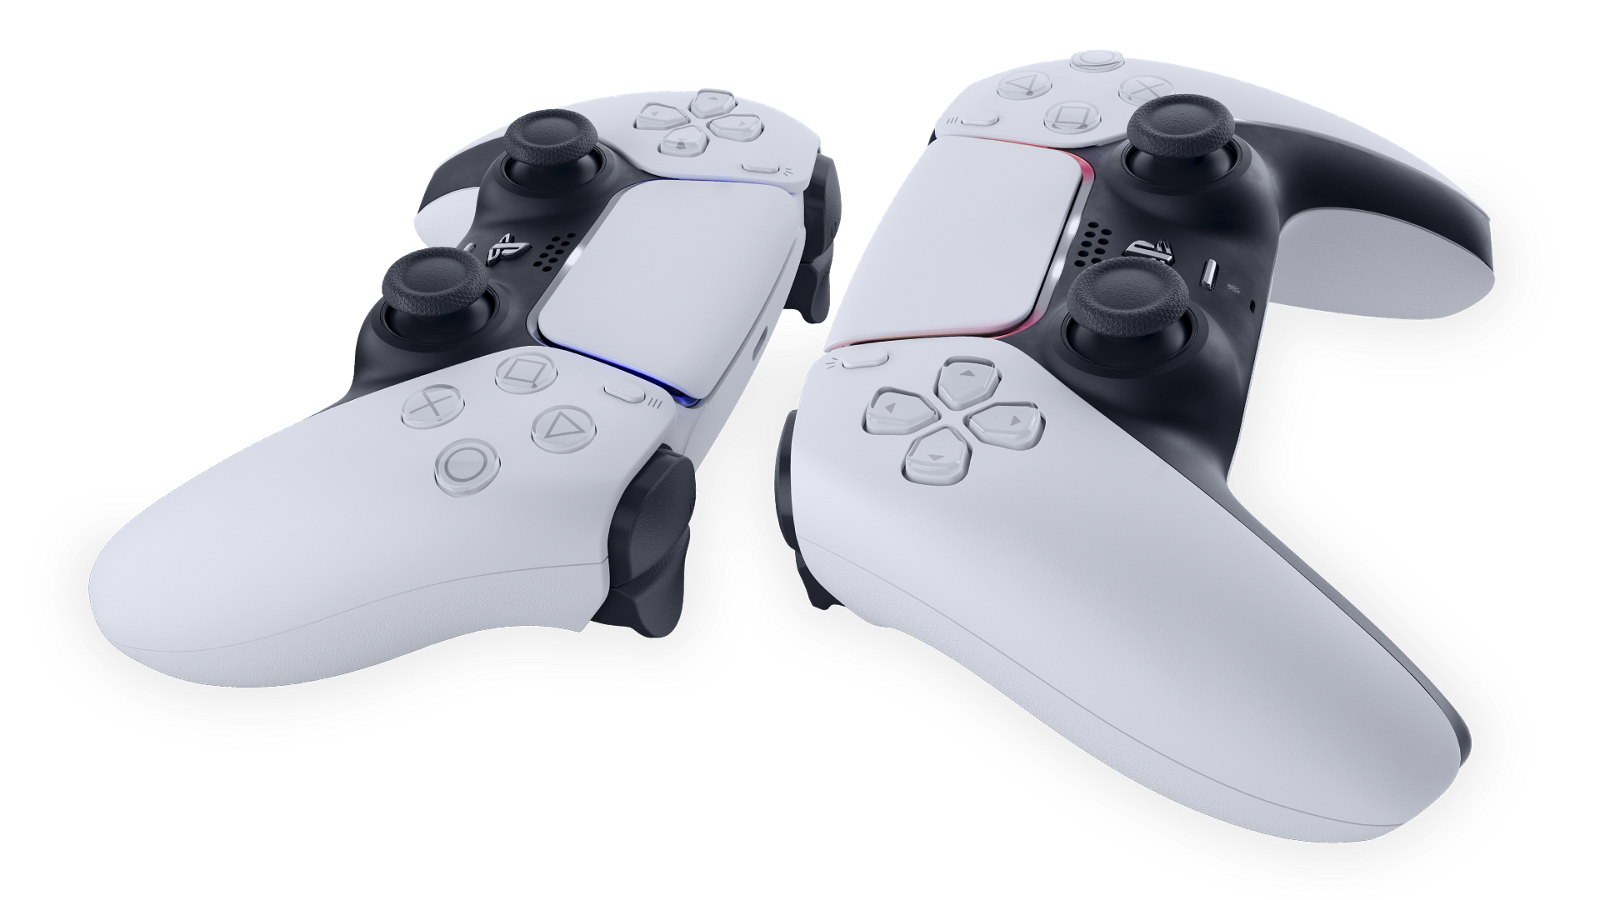 Two PS5 DualSense controllers